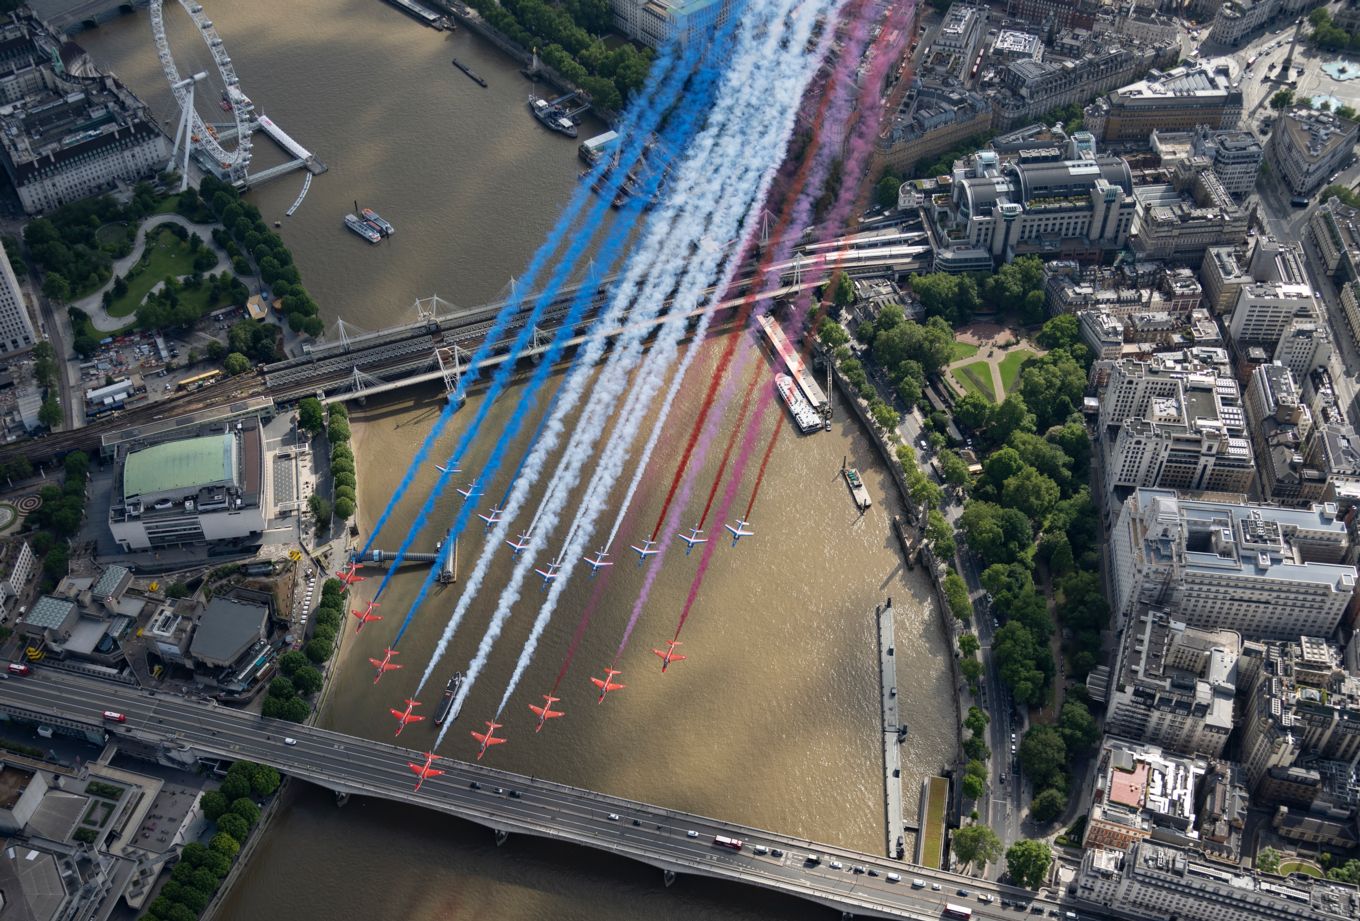 Both teams over London's landmarks. Image by Dave Jenkins. 